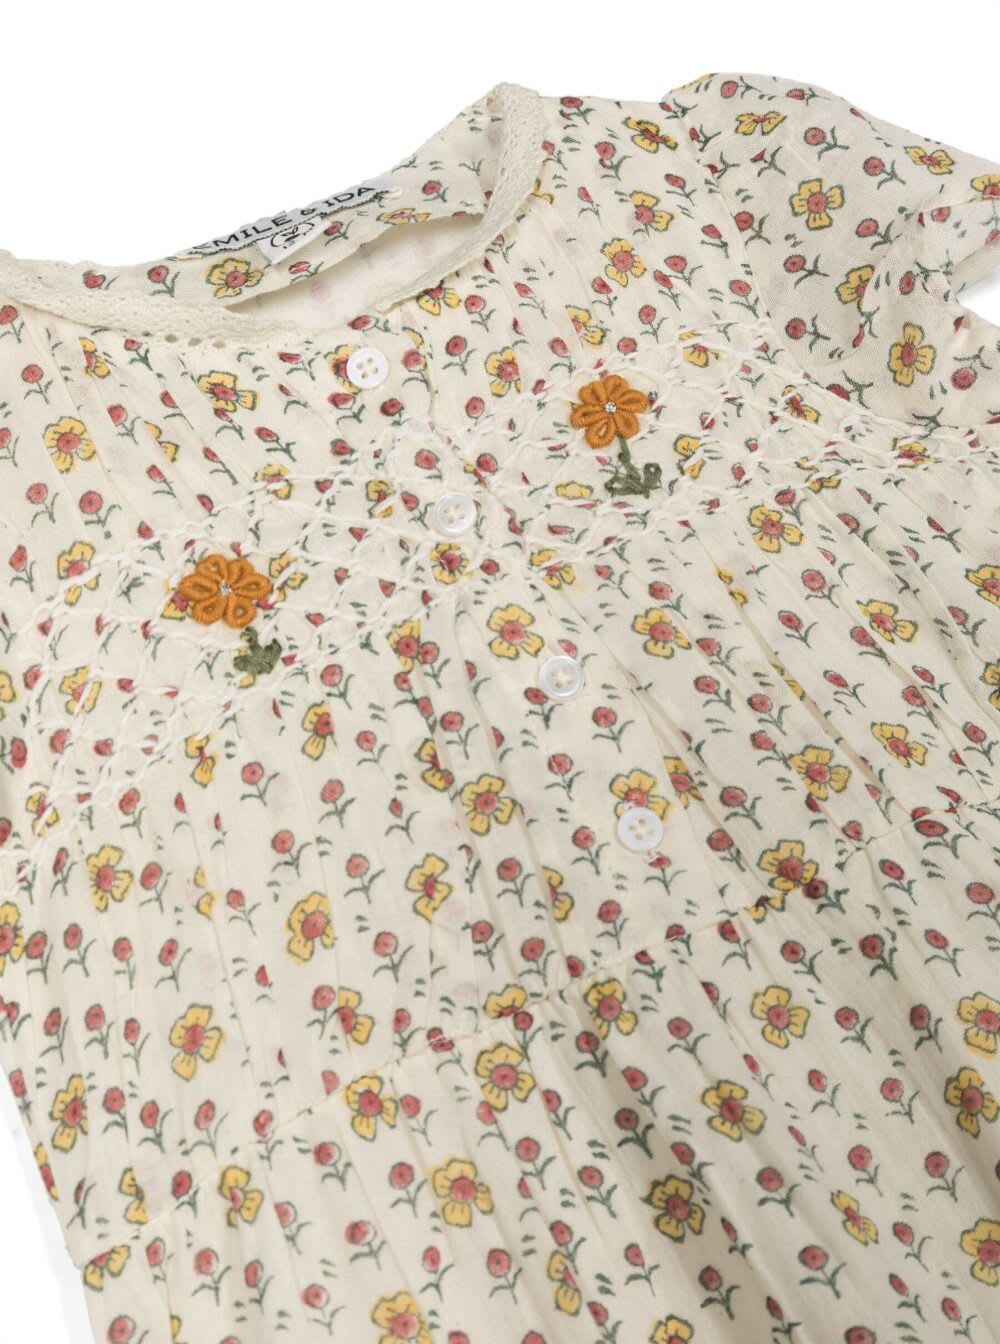 Shop Emile Et Ida Multicolor Onesie With Floreal Print And Daisy Embroidery In Cotton Baby In Beige